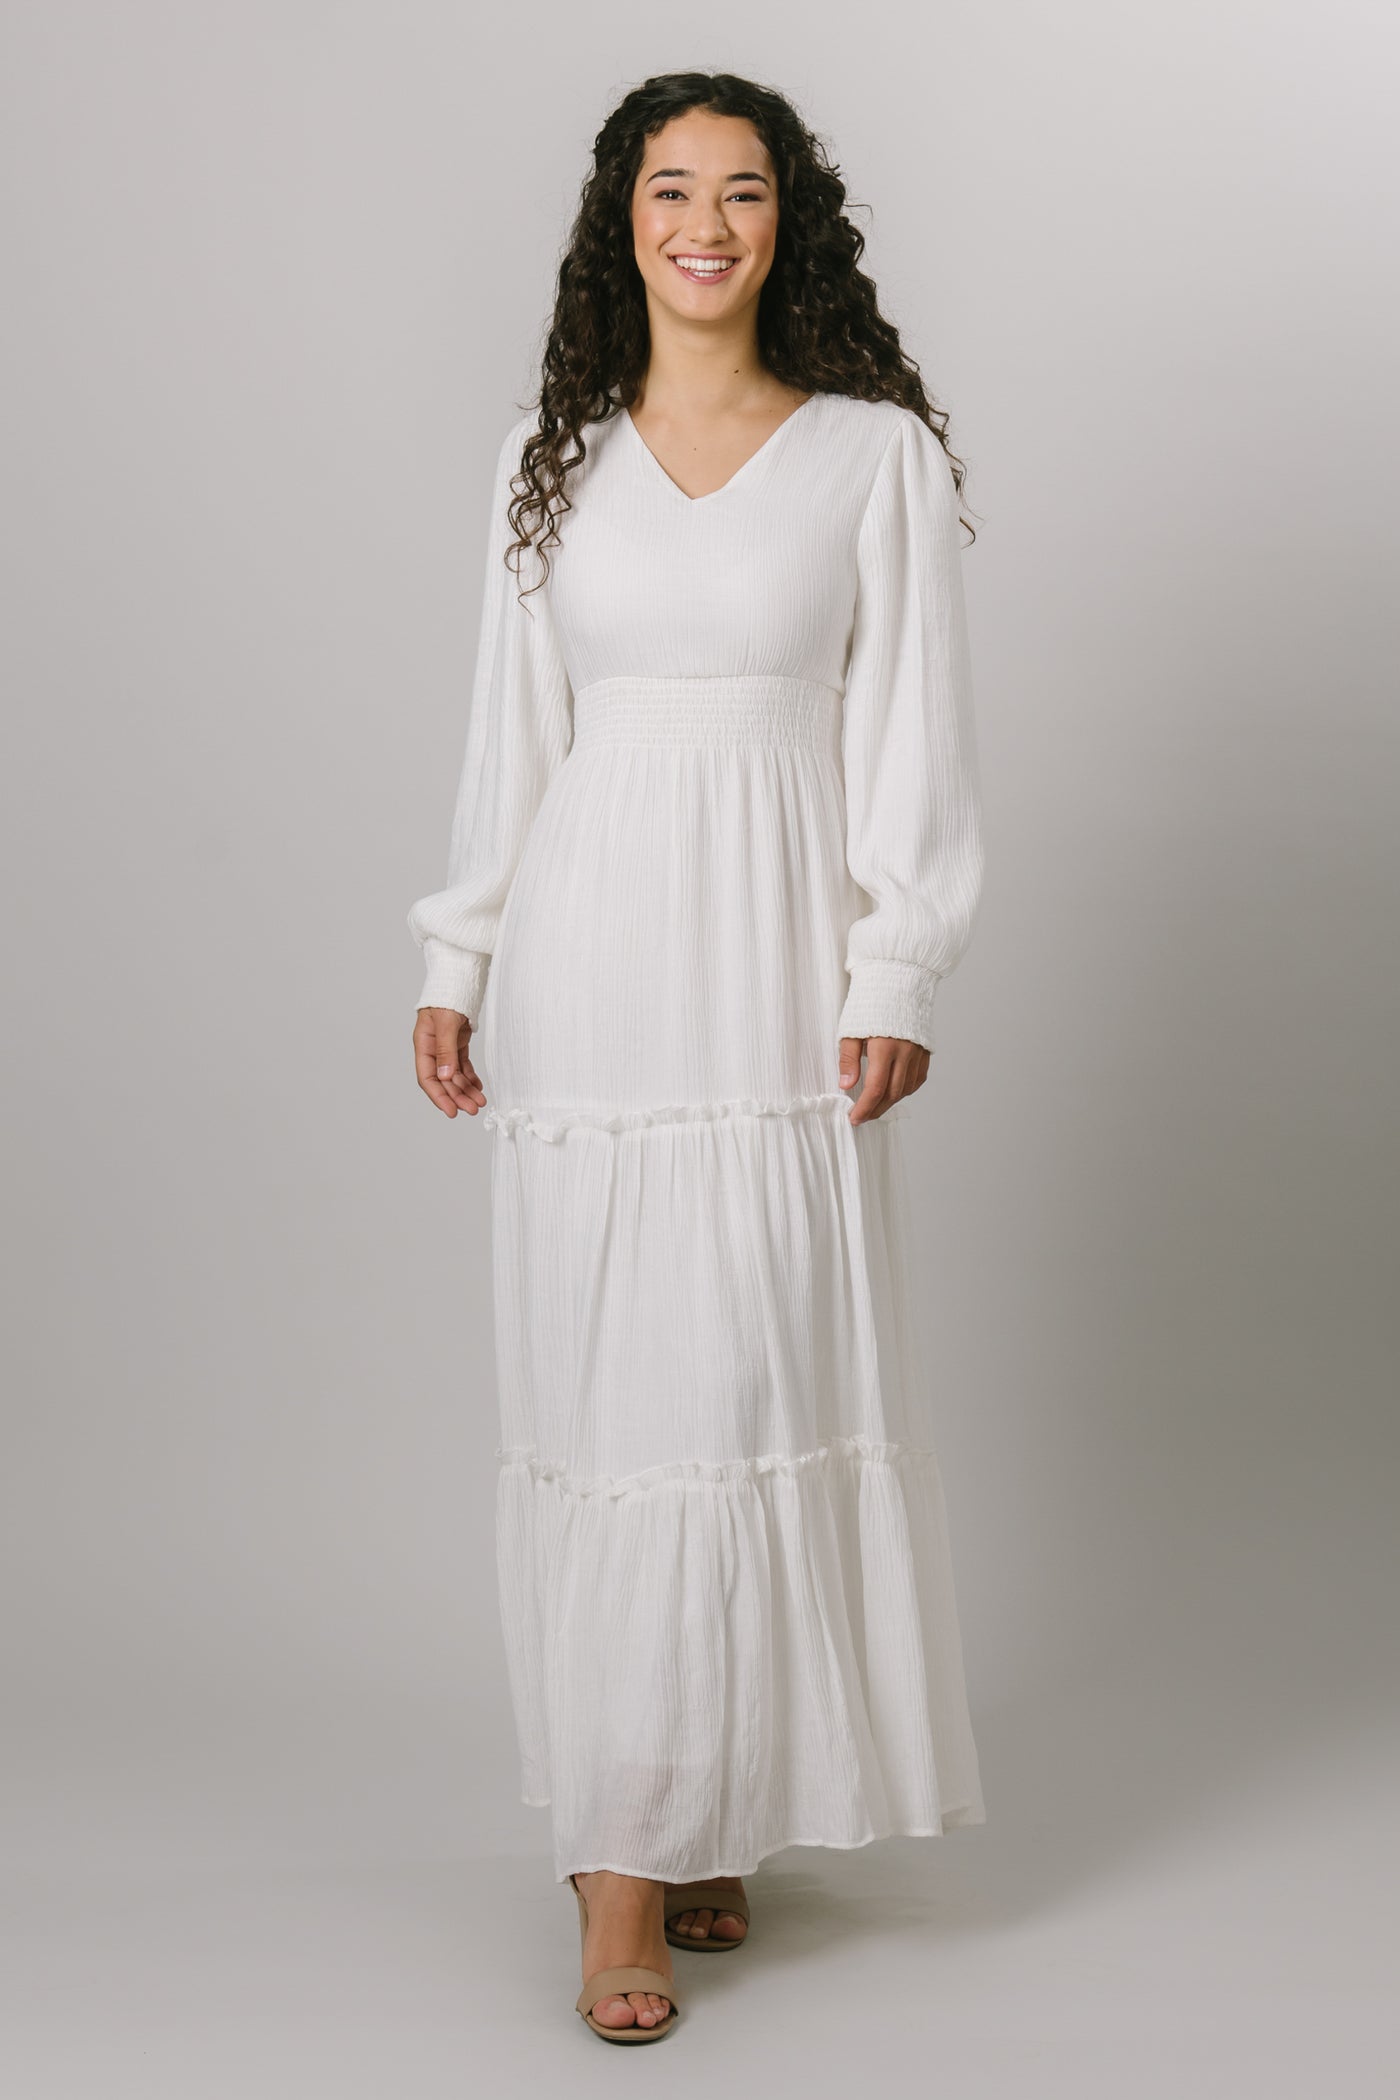 A modest smocked, tiered white maxi dress with long bishop sleeve and a v-neck.